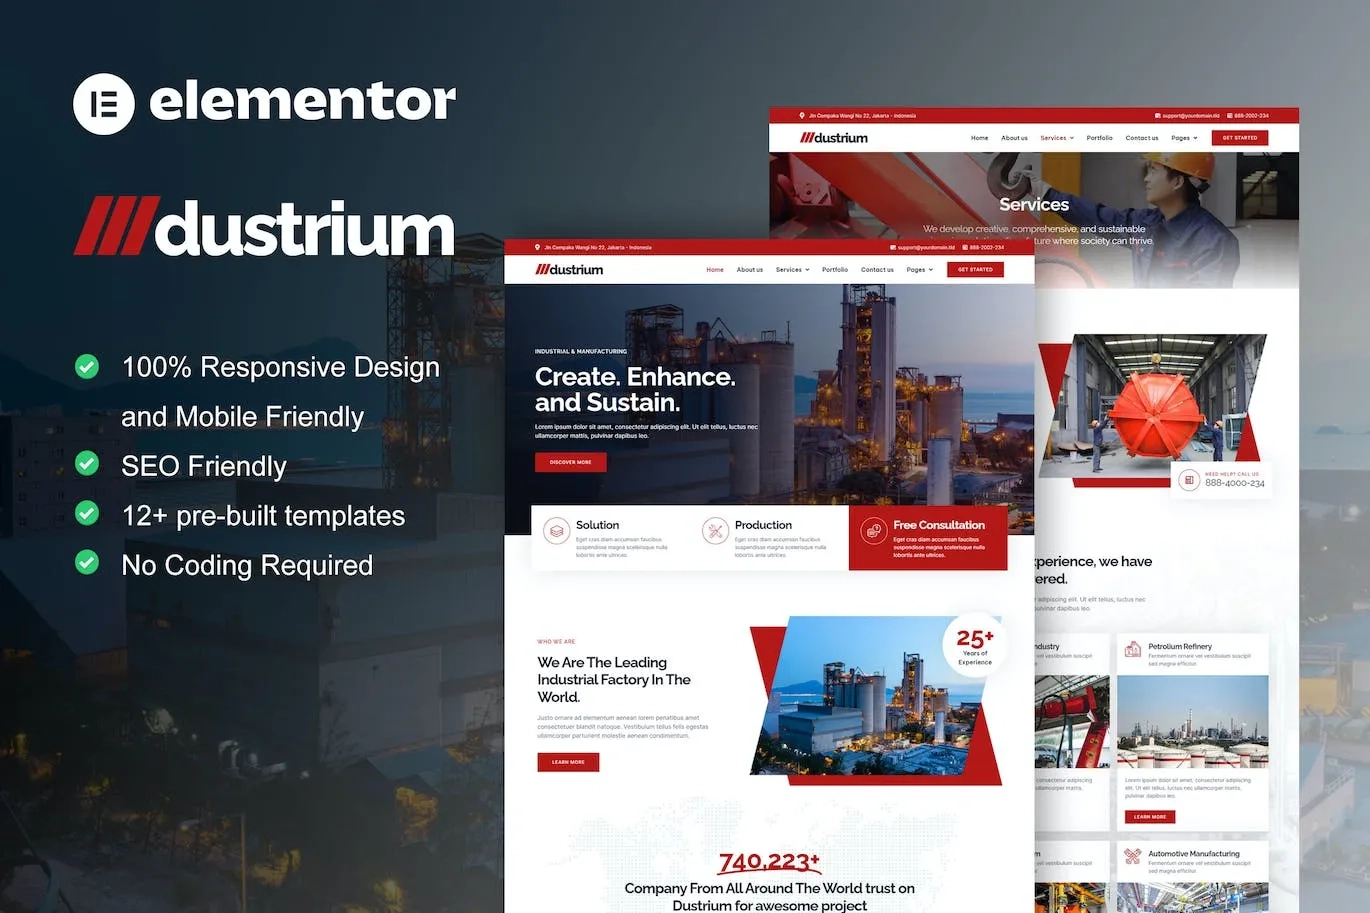 Dustrium Industrial And Manufacturing Elementor Pro Template Kit 55 1696846217 1